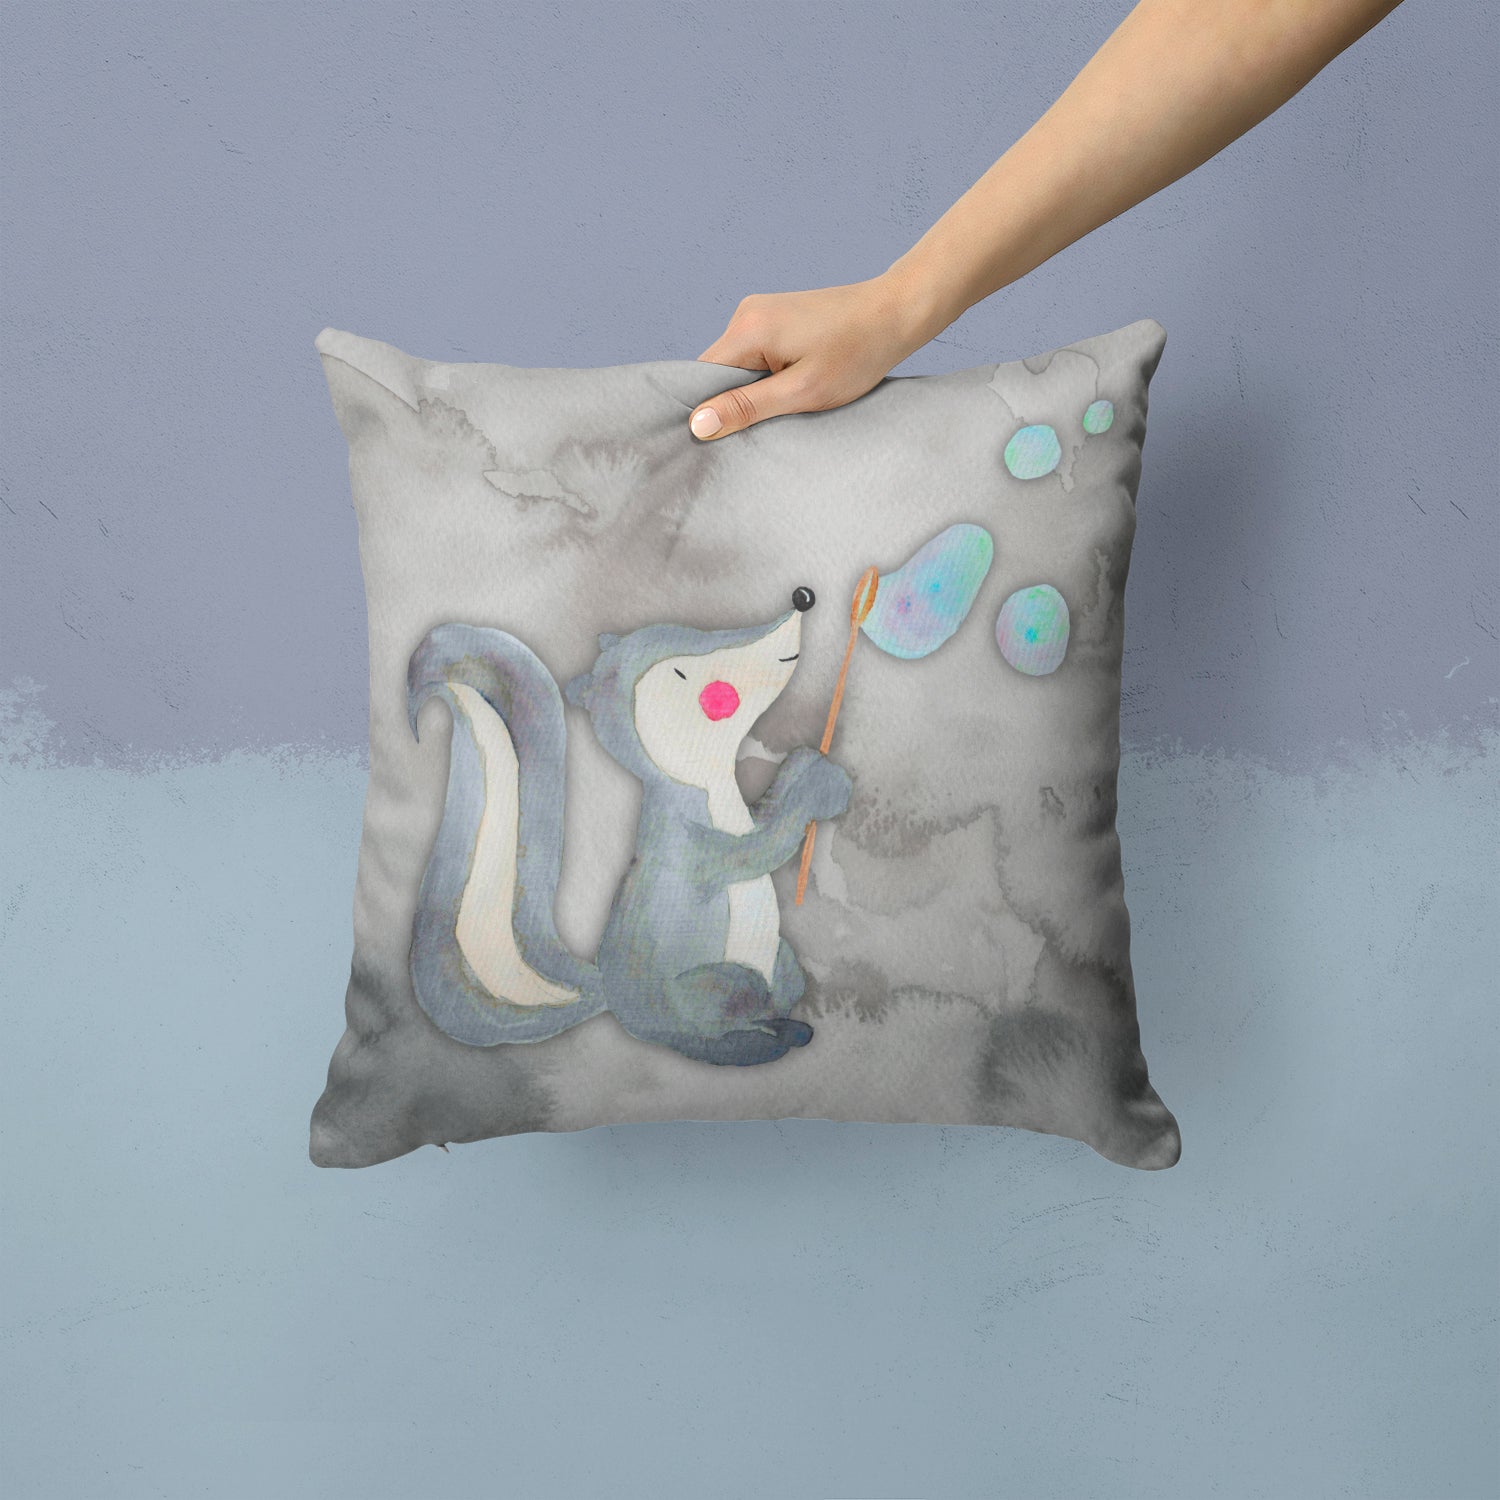 Skunk and Bubbles Watercolor Fabric Decorative Pillow BB7352PW1414 - the-store.com